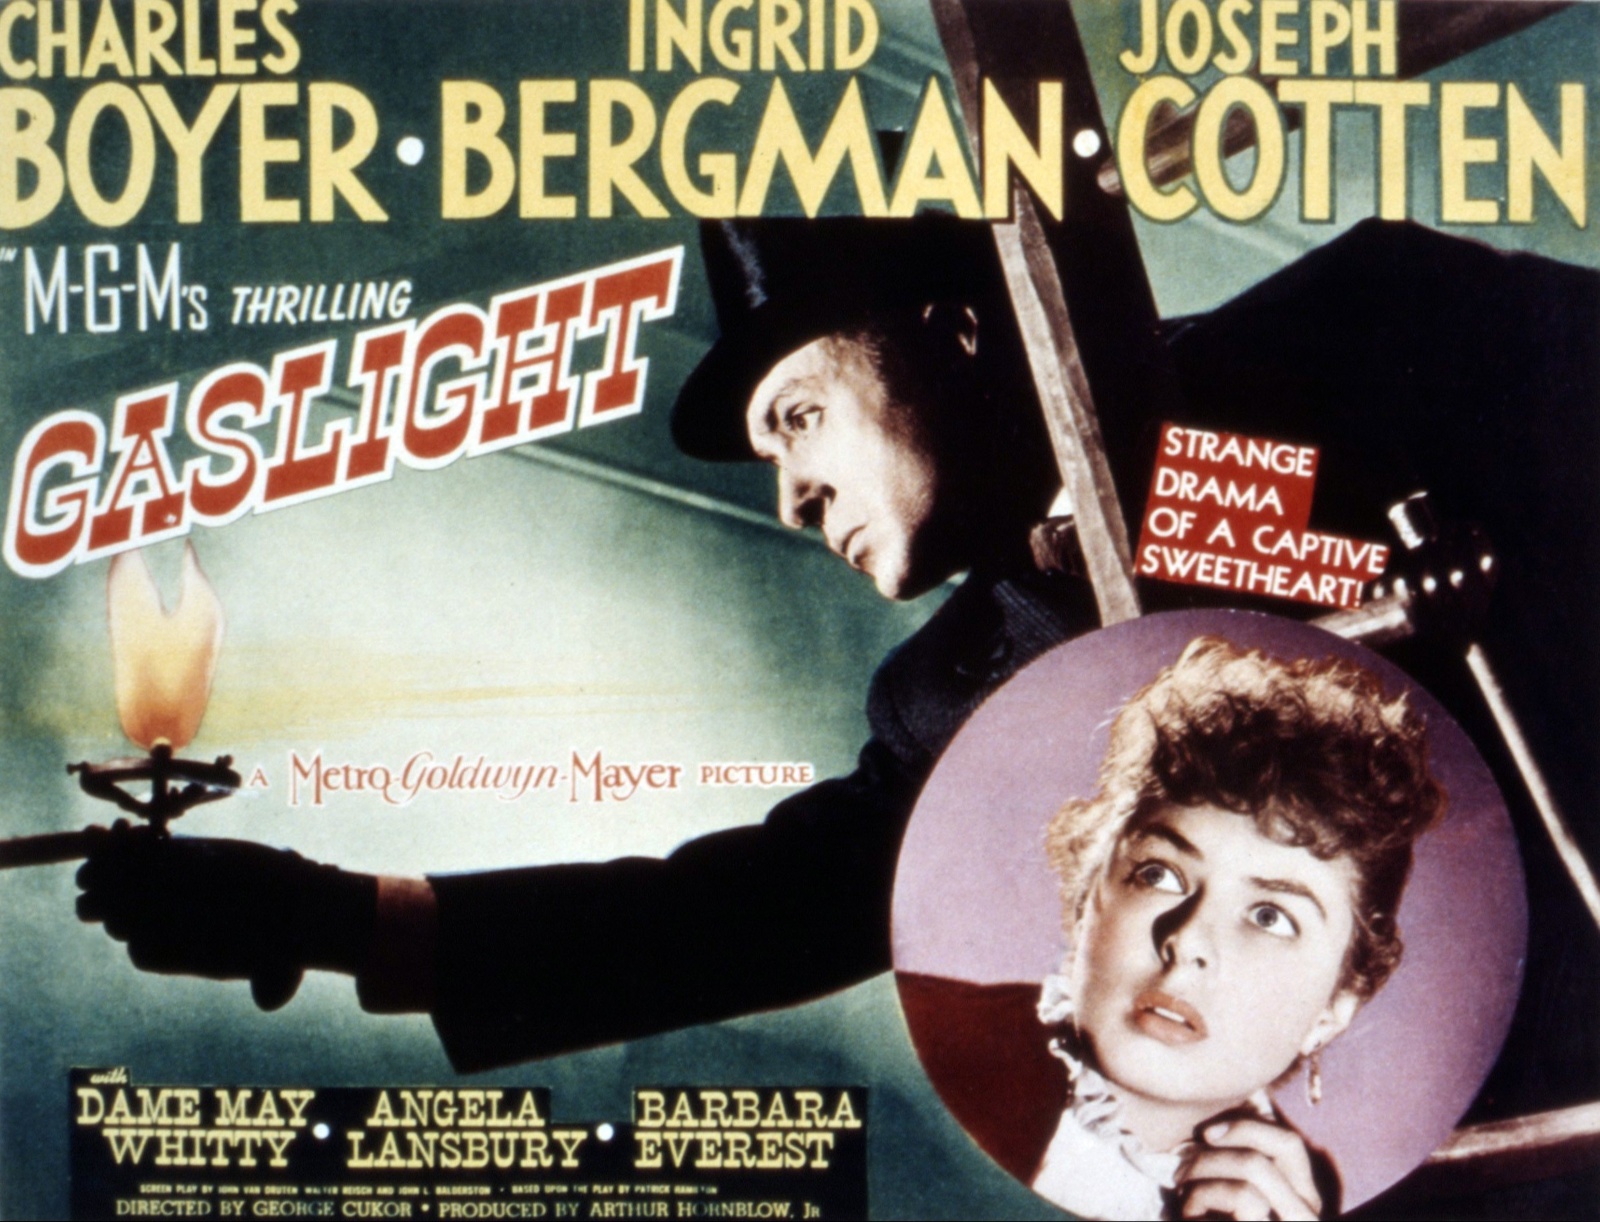 An old movie poster shows a man holding a gaslight.